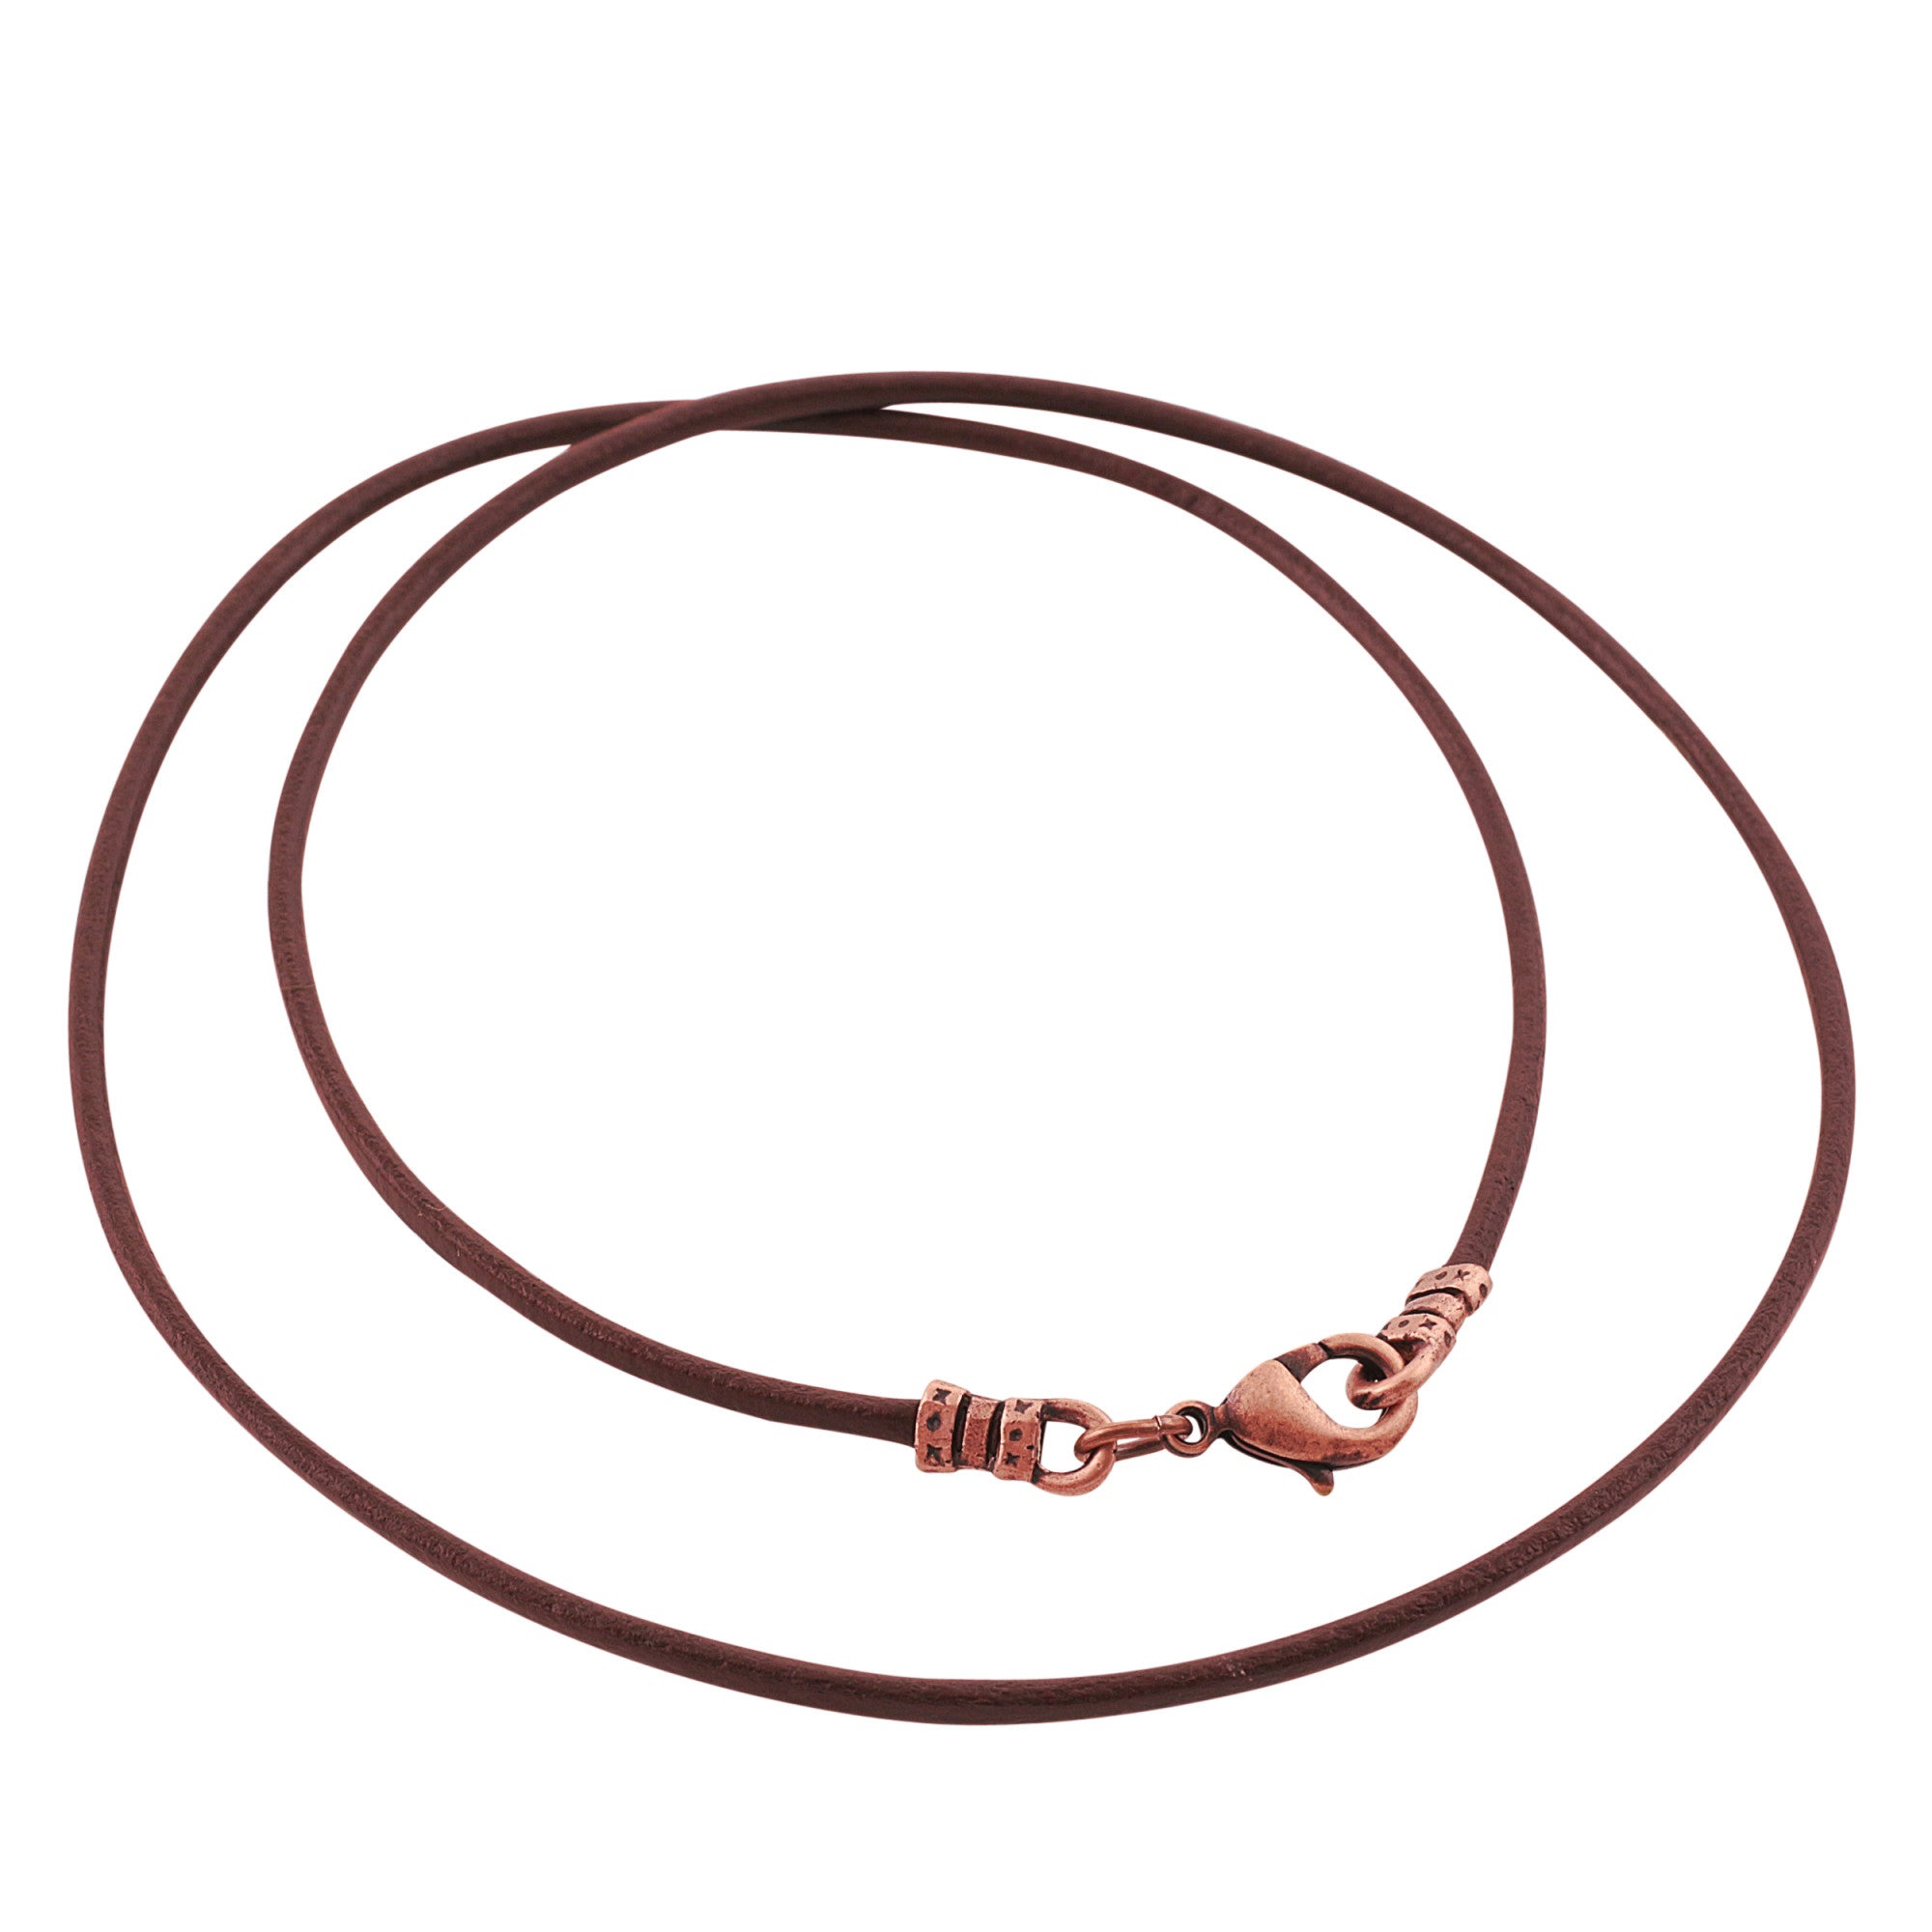 CleverDelights Imitation Leather Cord Necklaces - Brown - 18 Inch - 100 Pack